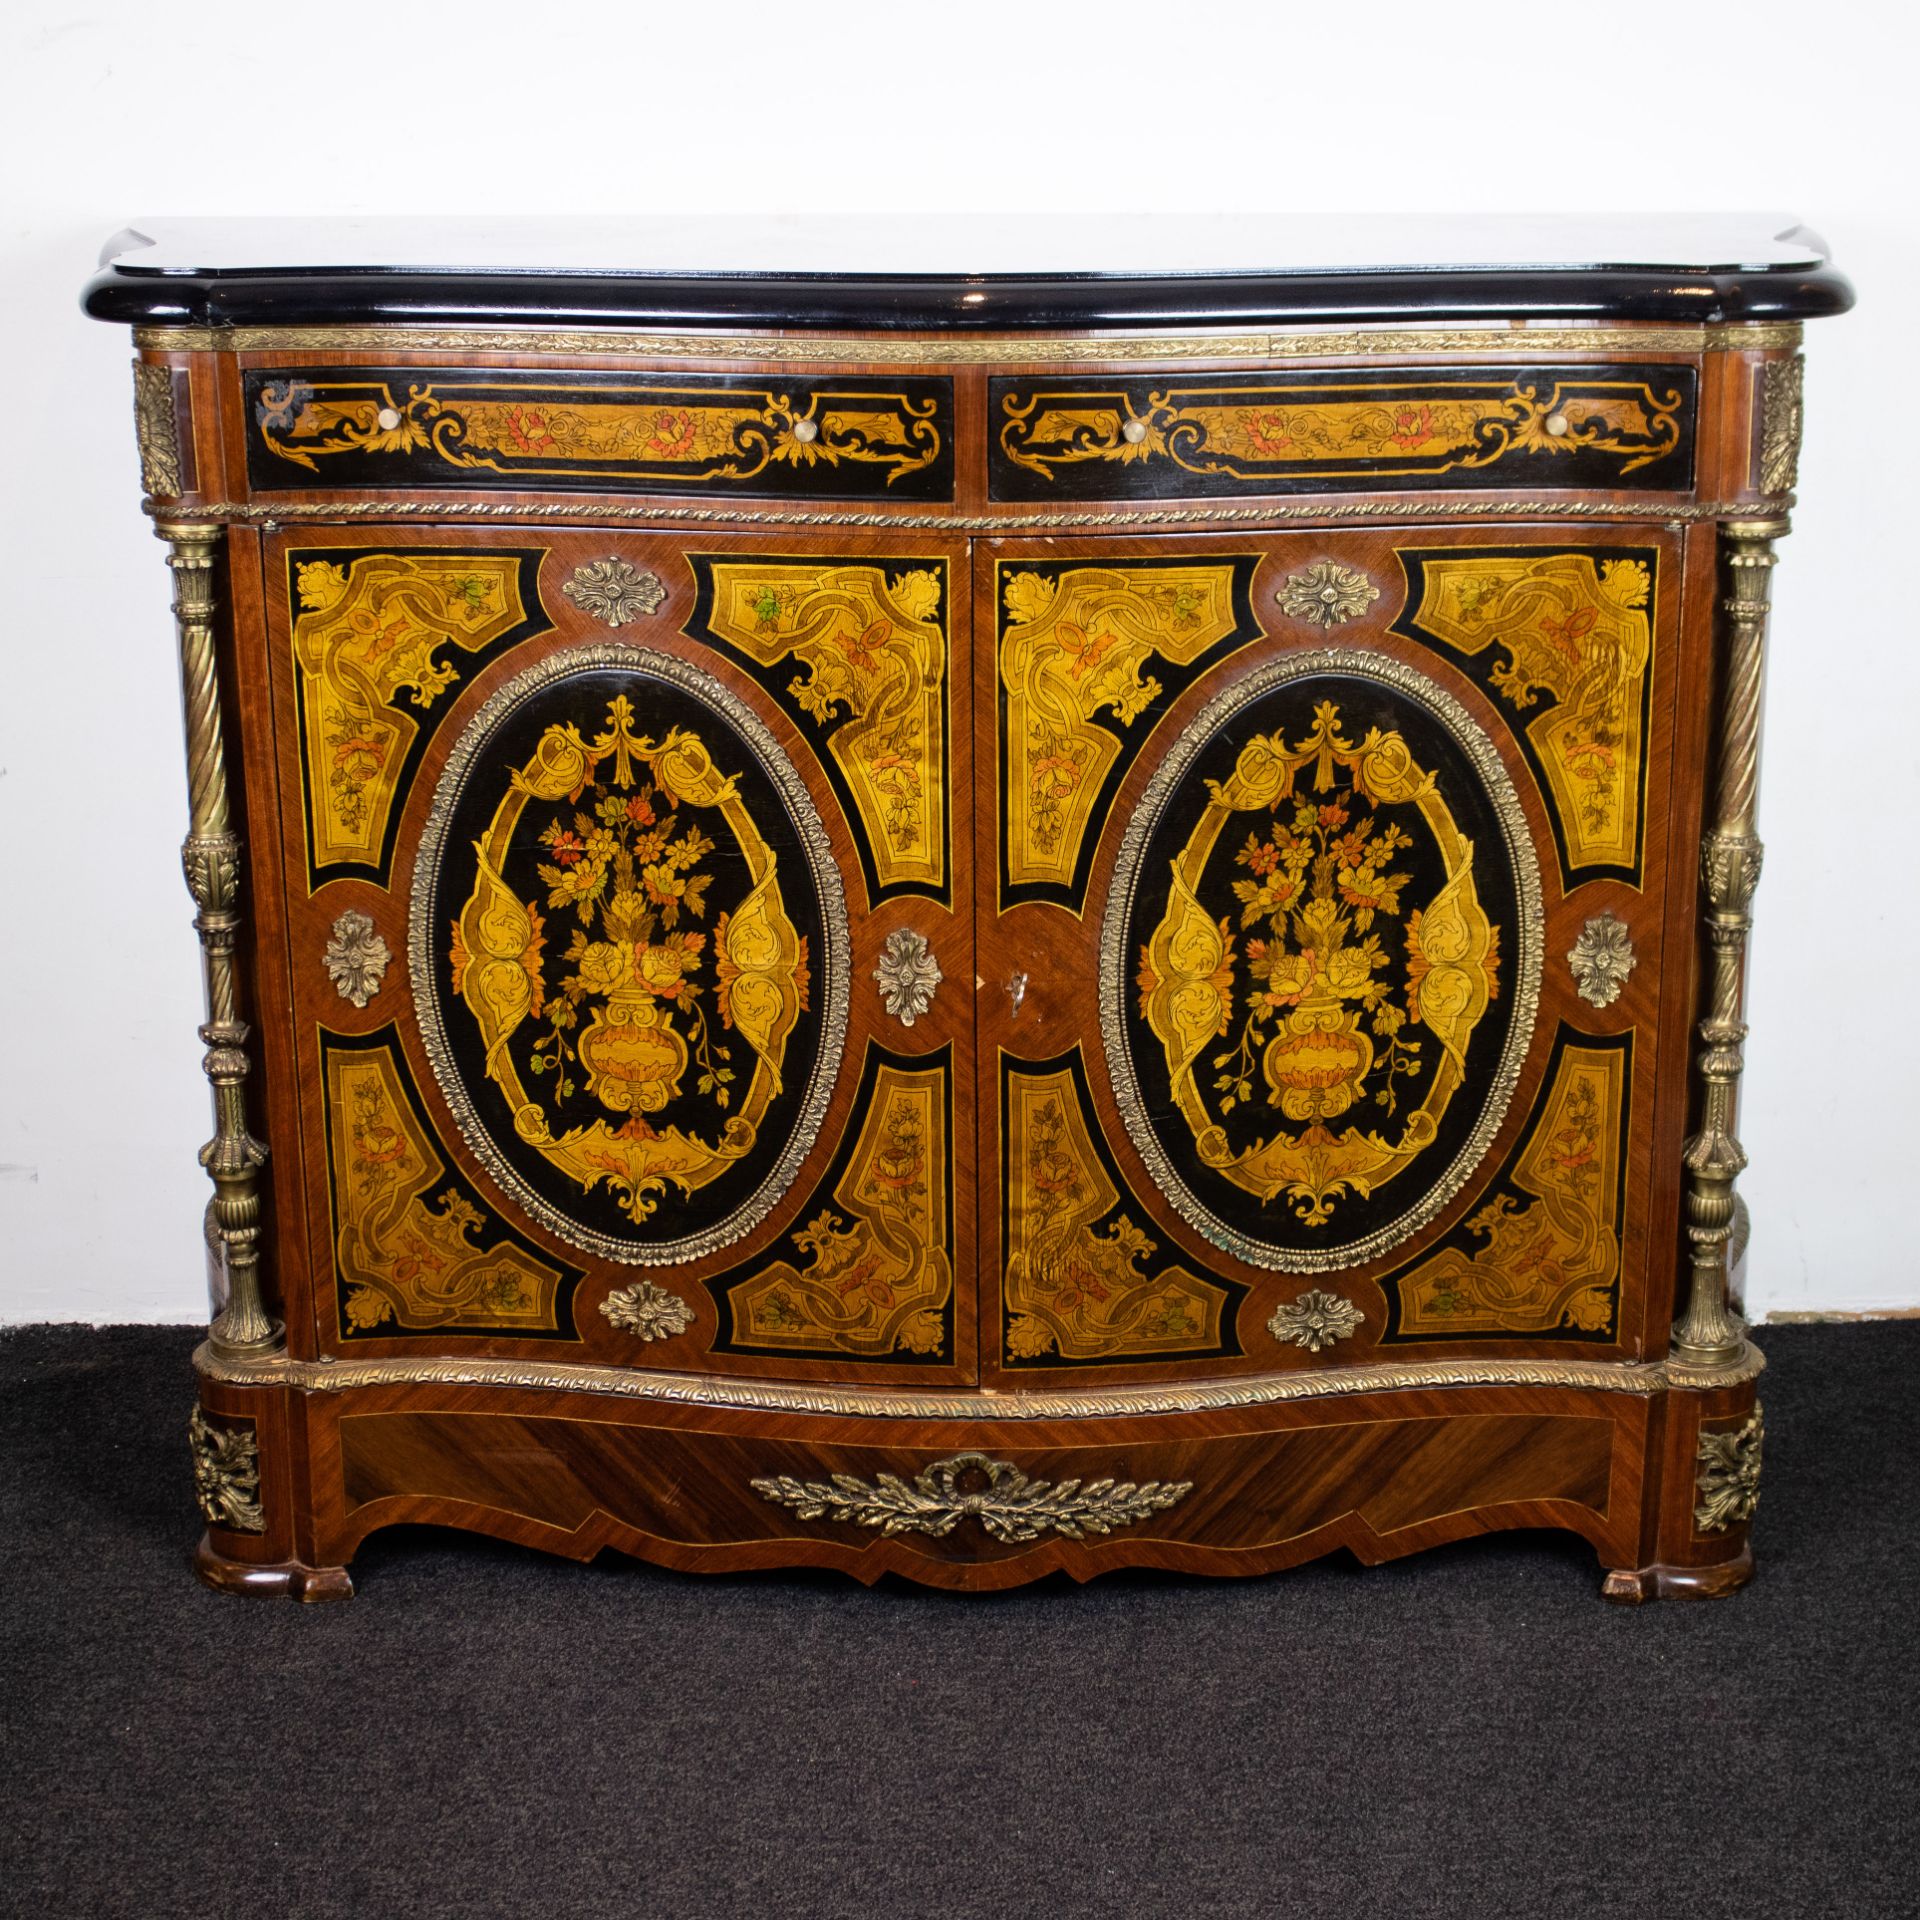 Cabinet with bronze mounts and a wooden top